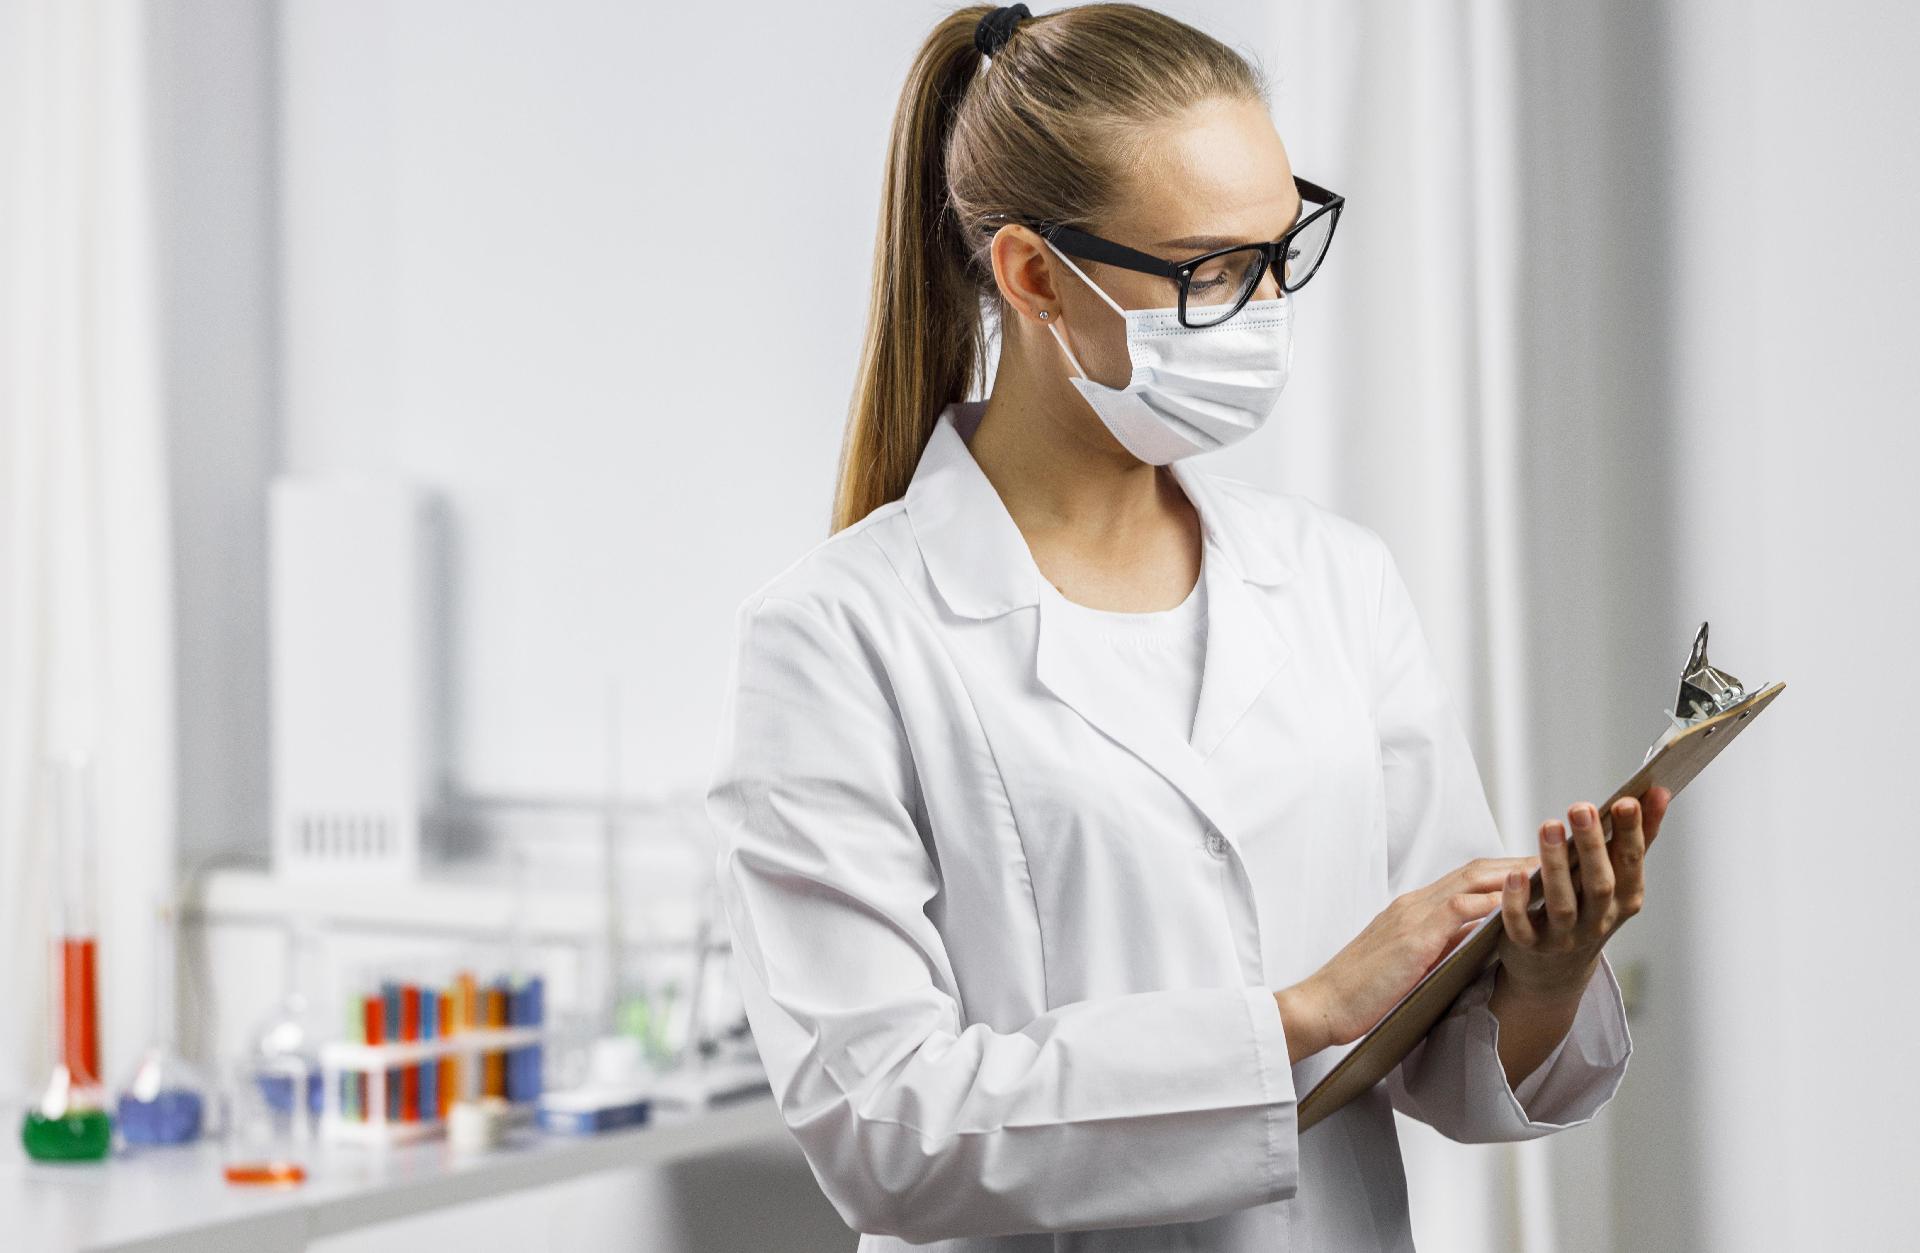 portrait-female-researcher-with-medical-mask-clipboard.jpg